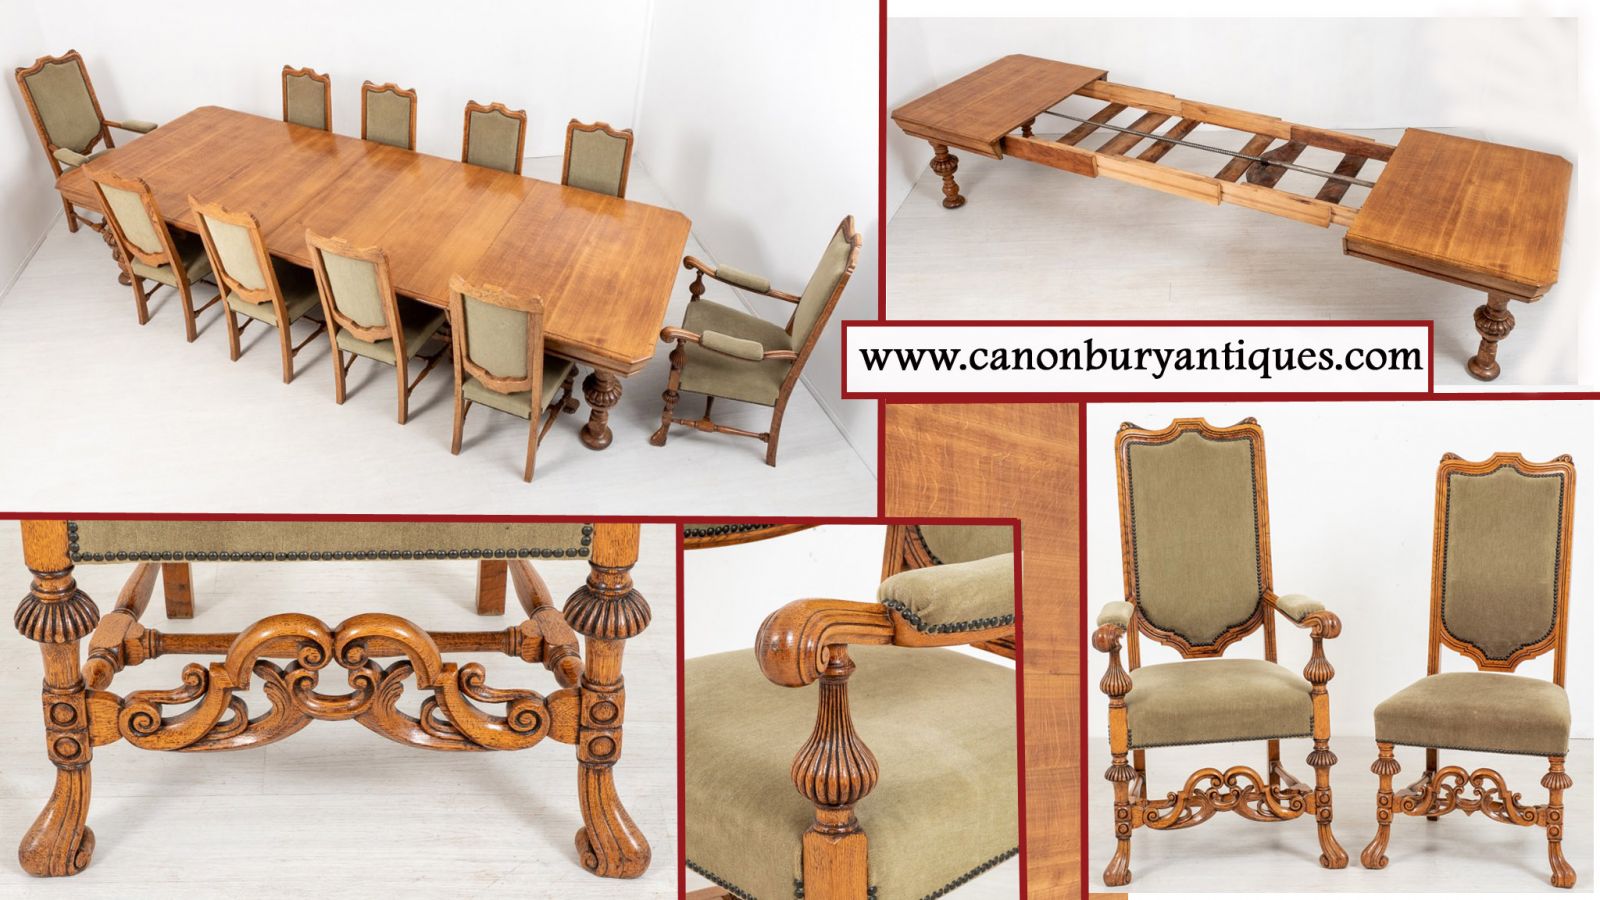 Set cushioned oak farmhouse dining chairs around this refectory table